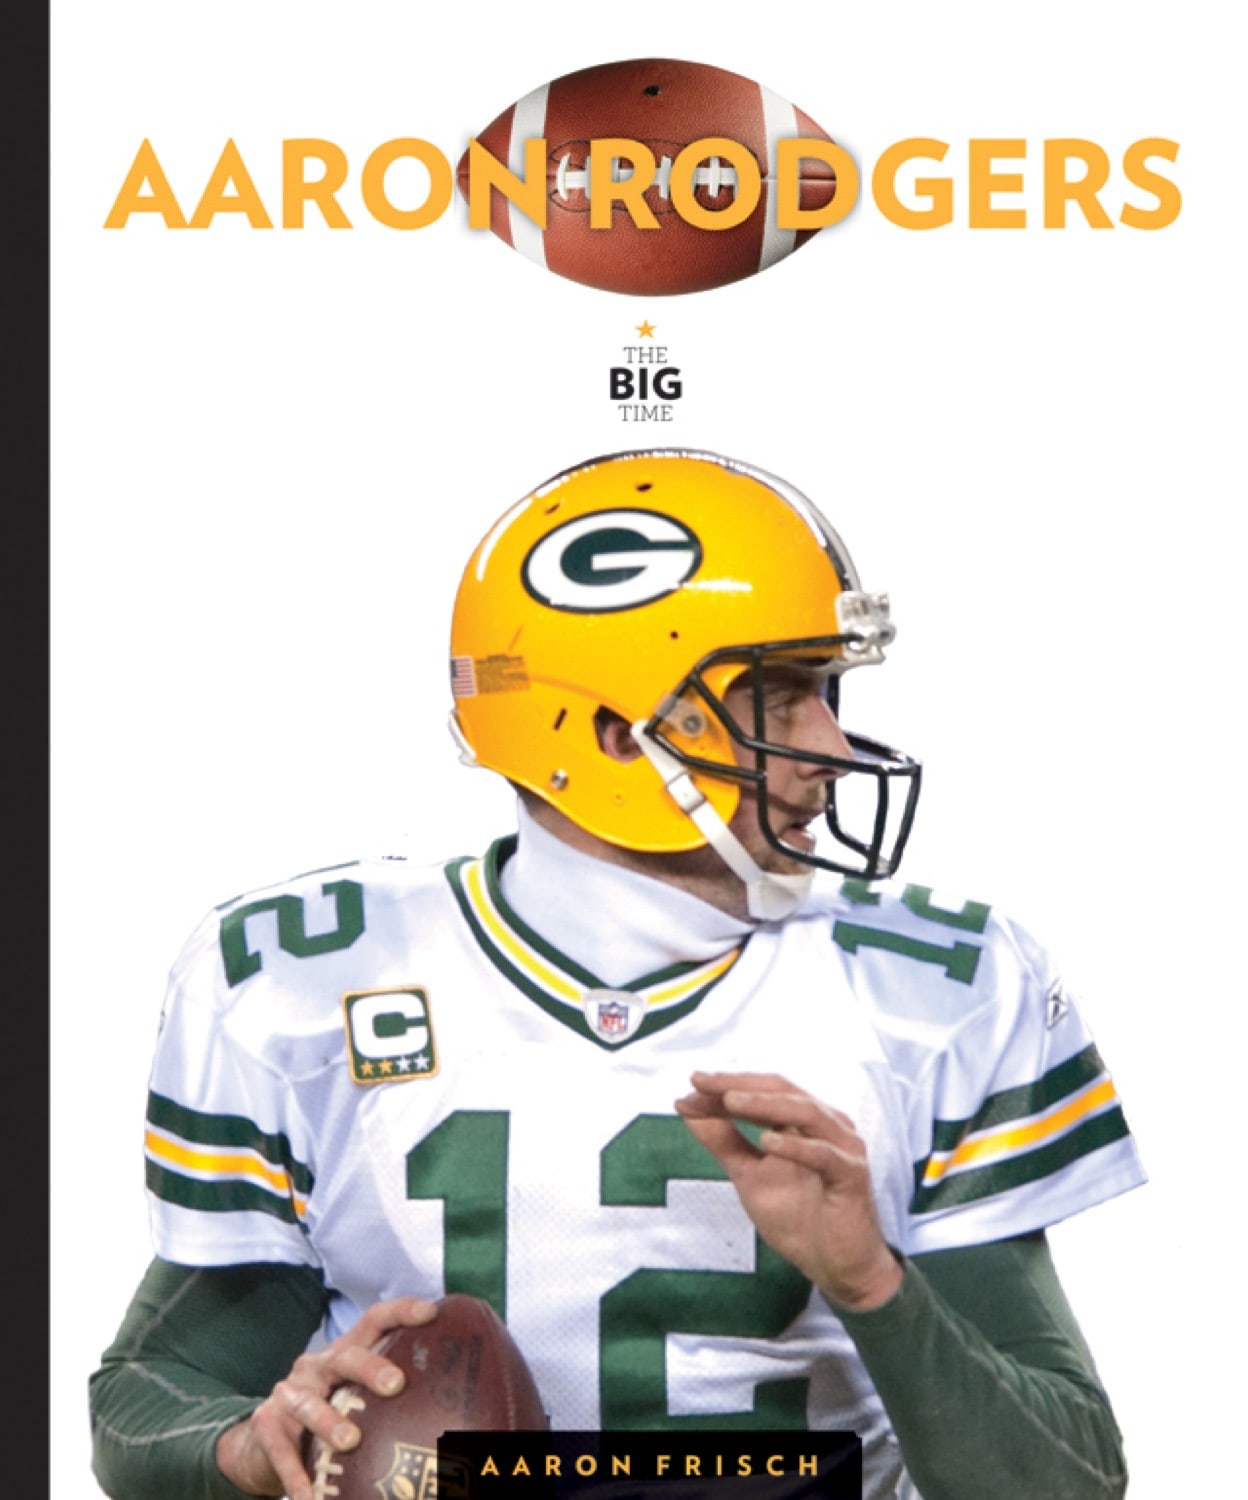 The Big Time: Aaron Rodgers